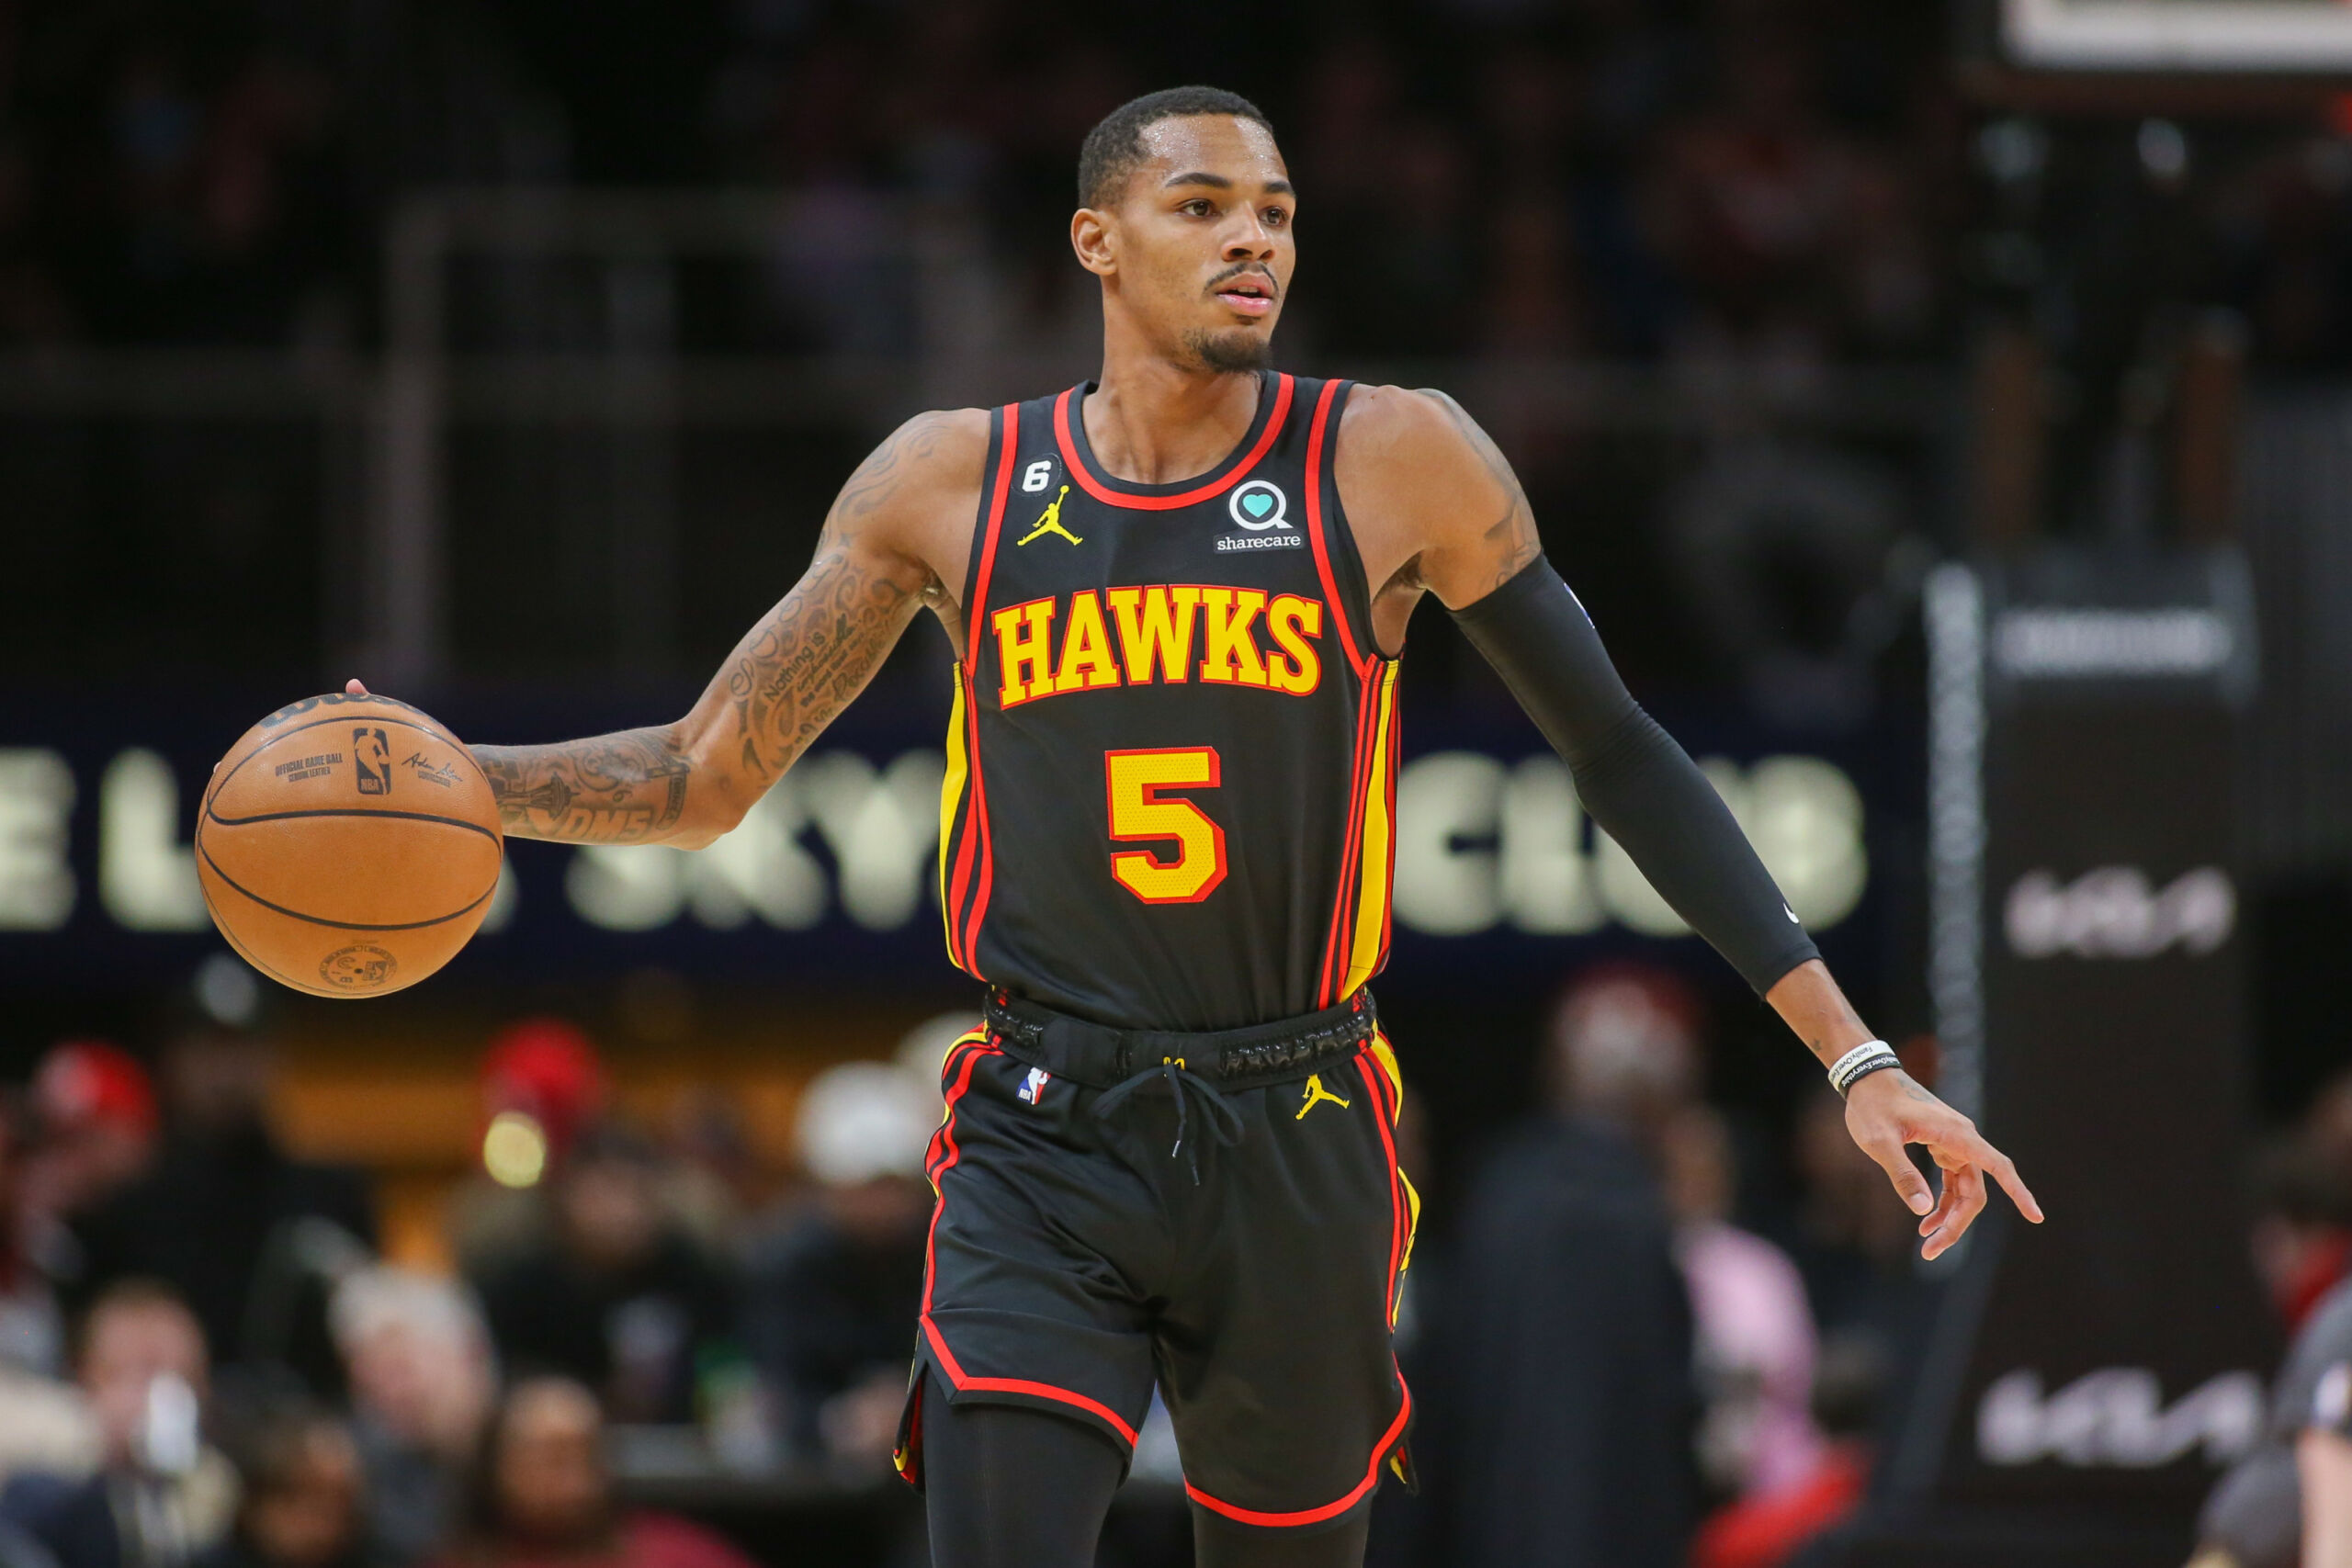 Hawks believe the franchise is headed in the right direction